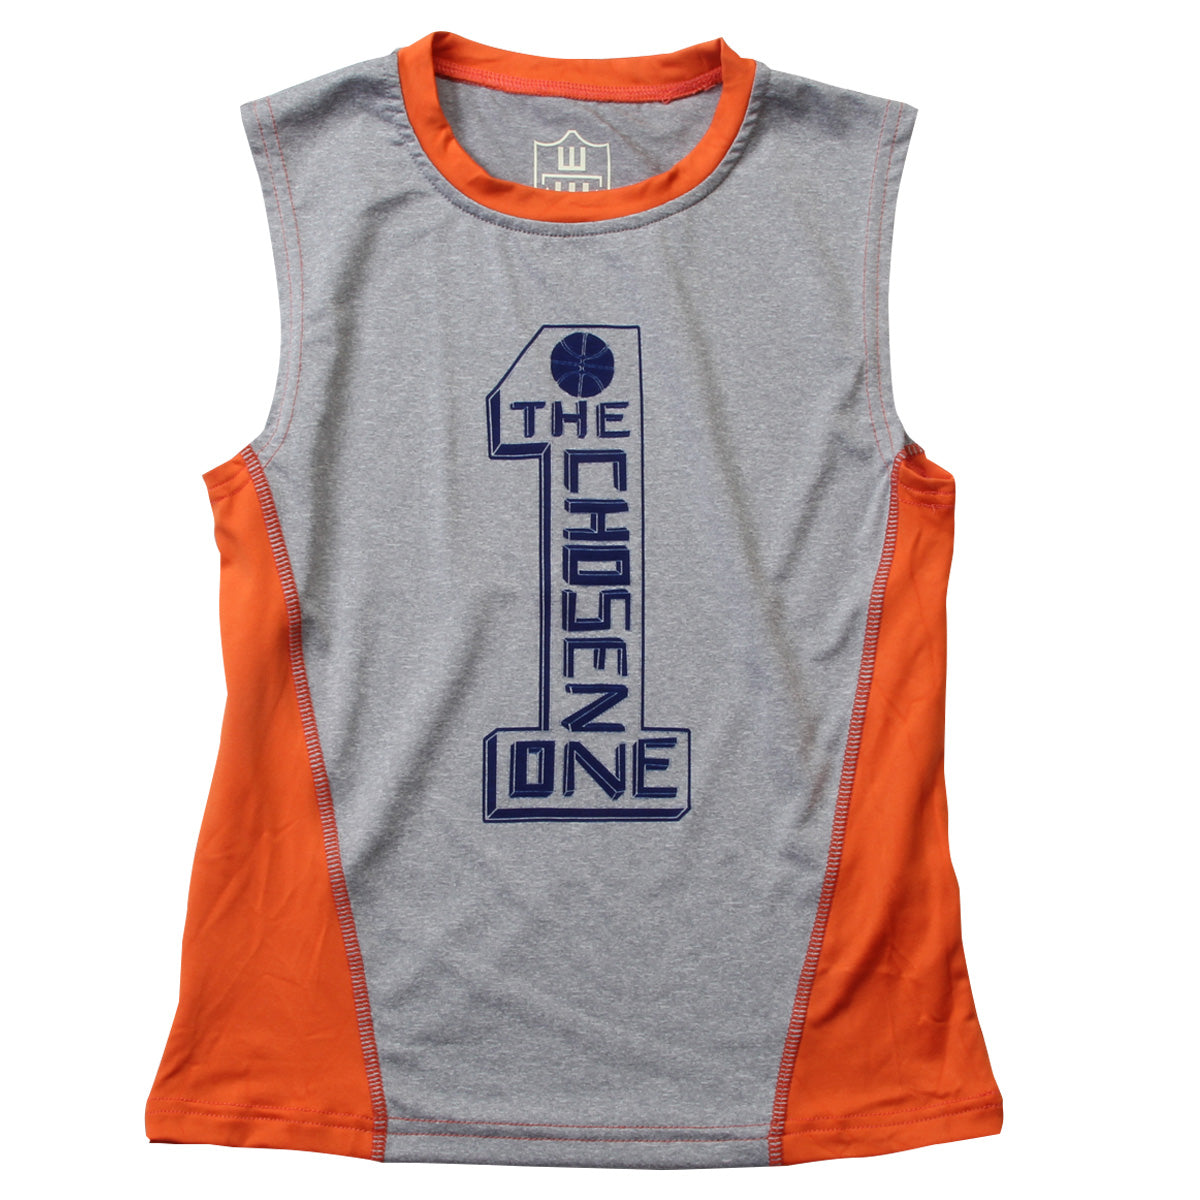 Wes & Willy Chosen One Perf. Sleeveless Tee